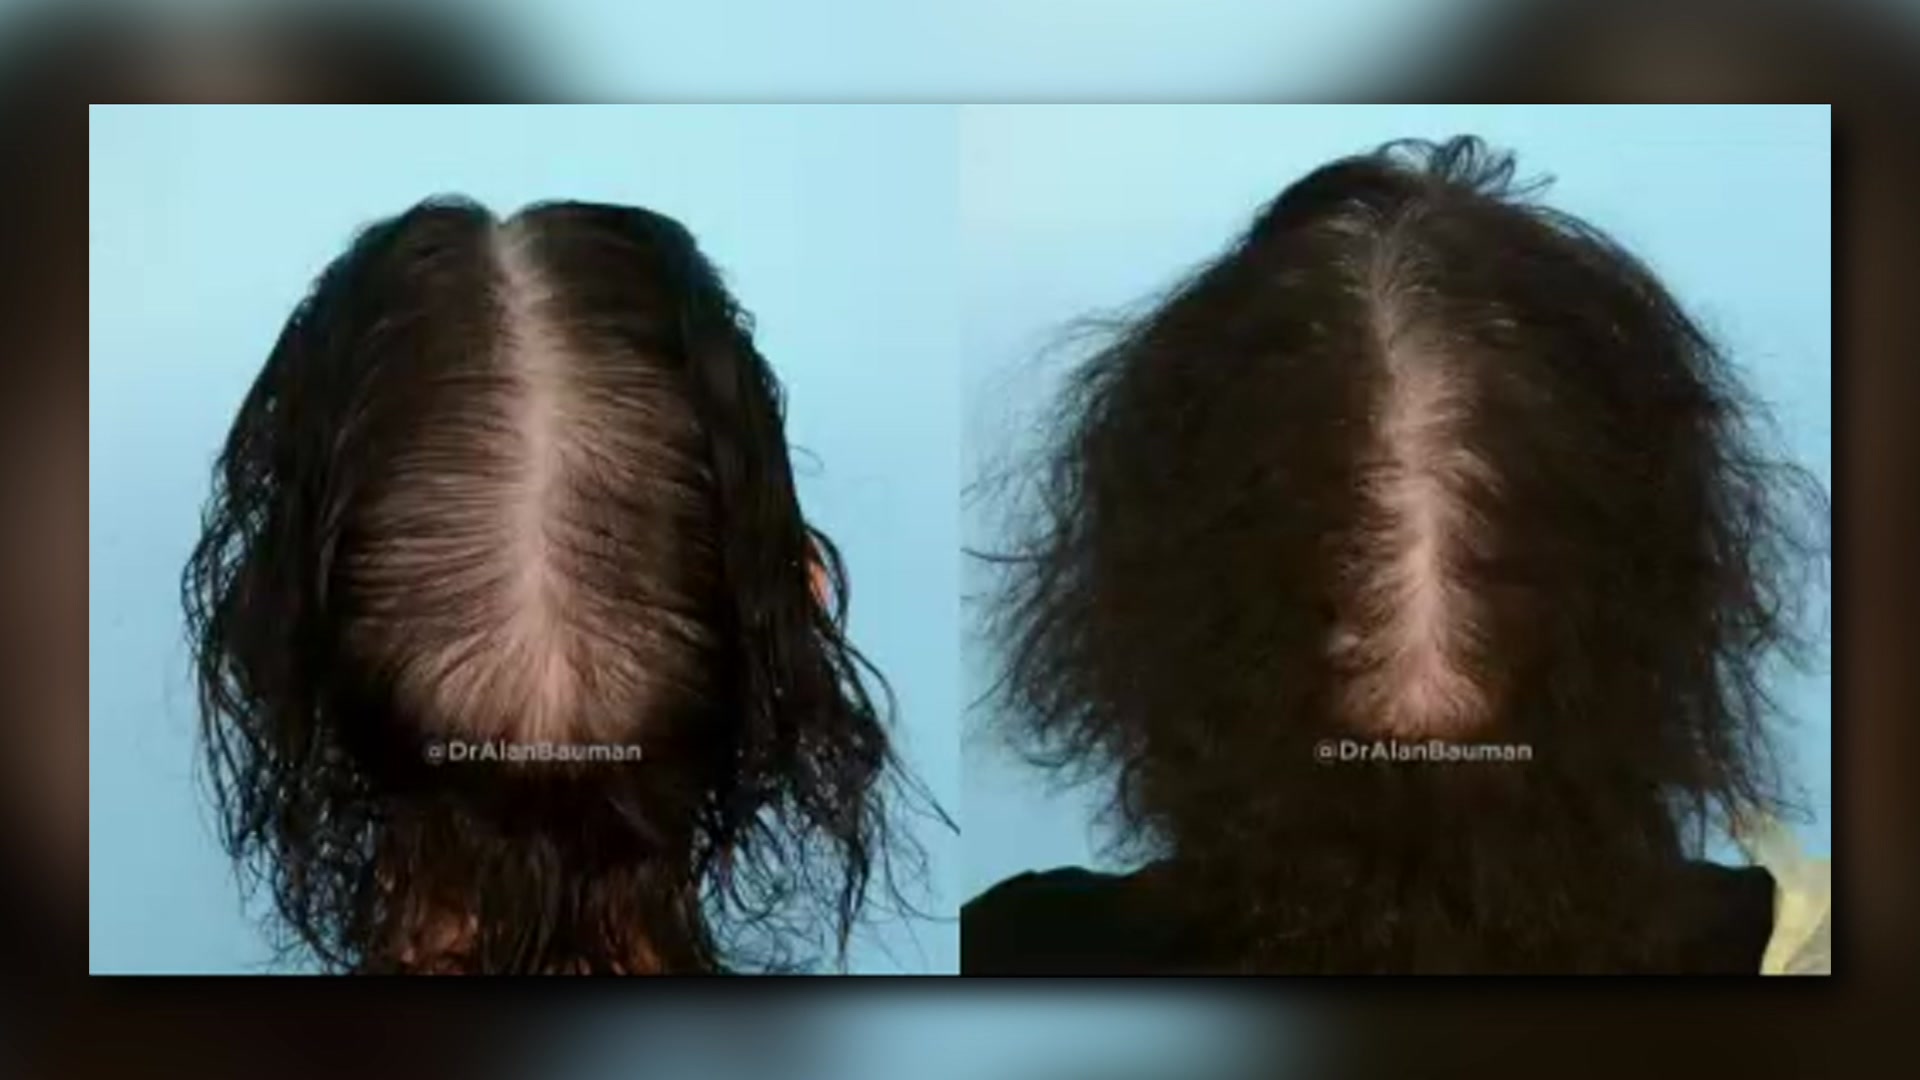 Is it possible for people to avoid genetic hair loss